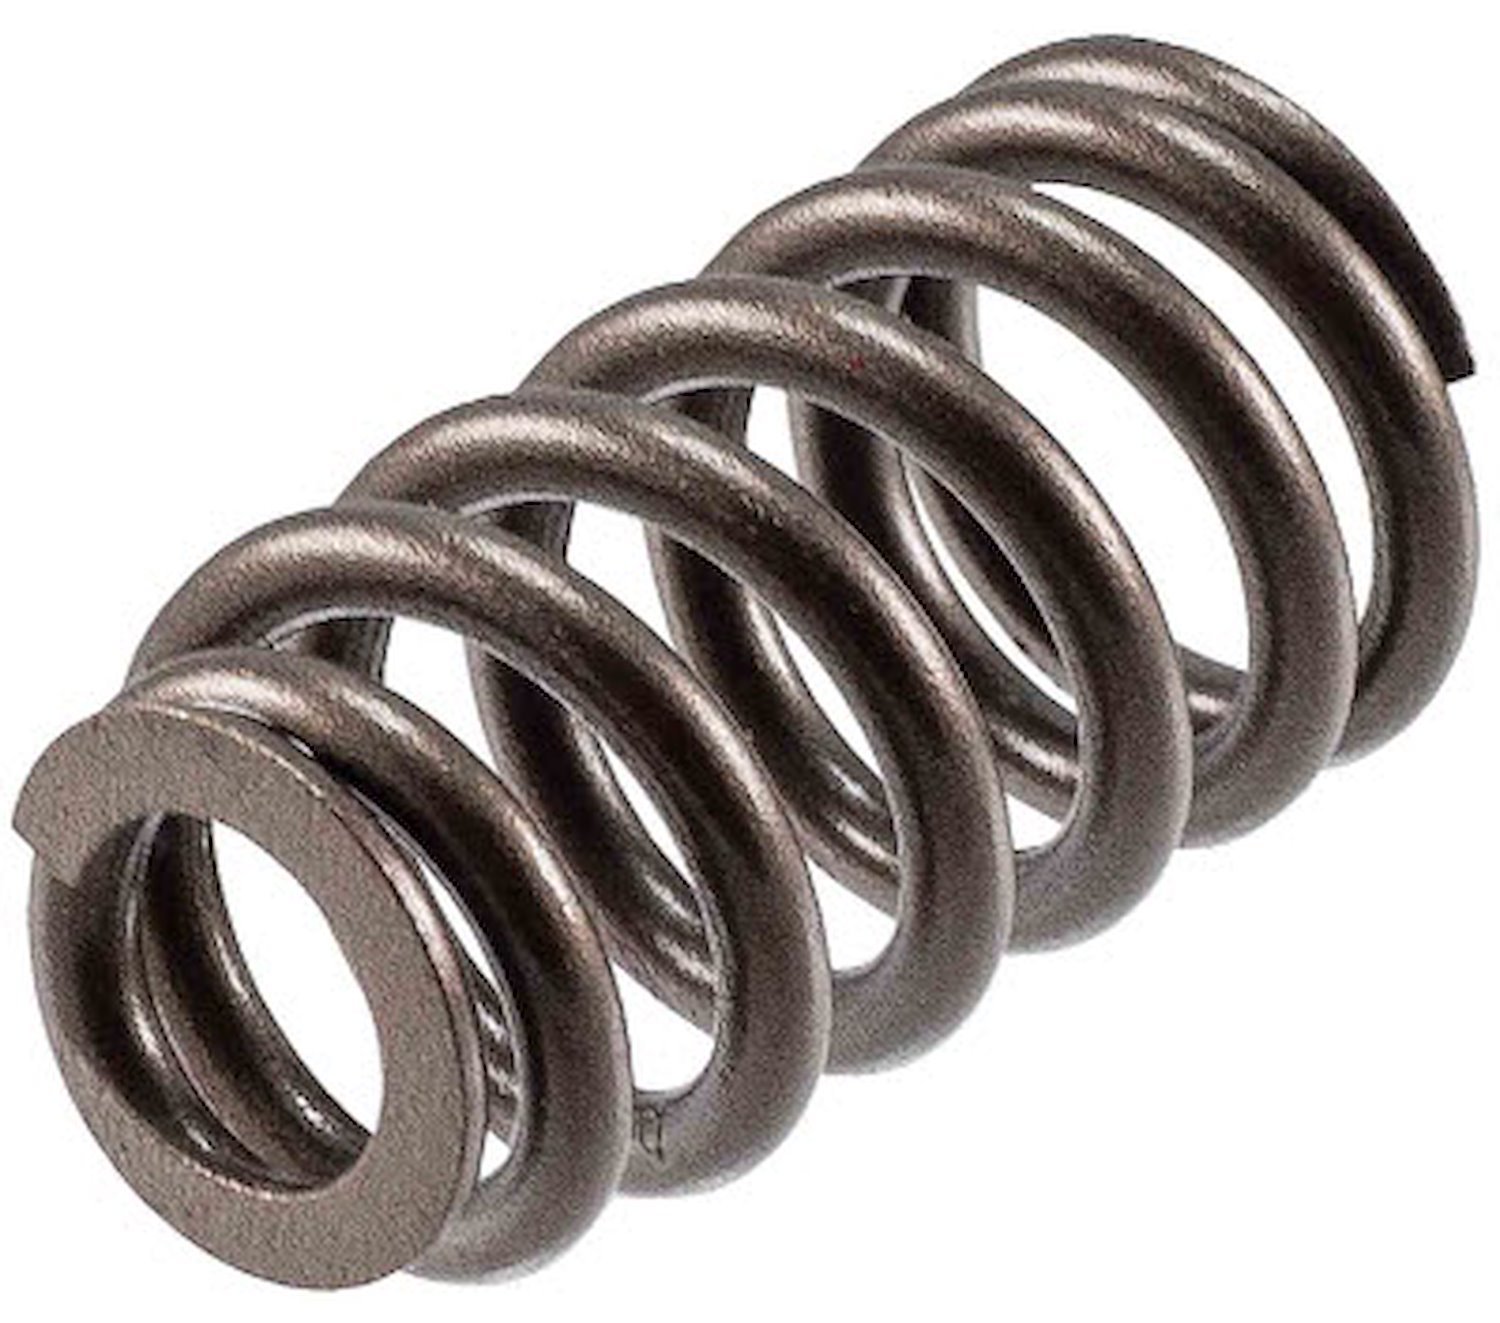 VS-1700 Replacement Valve Spring Fits Select GM Models w/3.0L, 3.6L V6 Engines